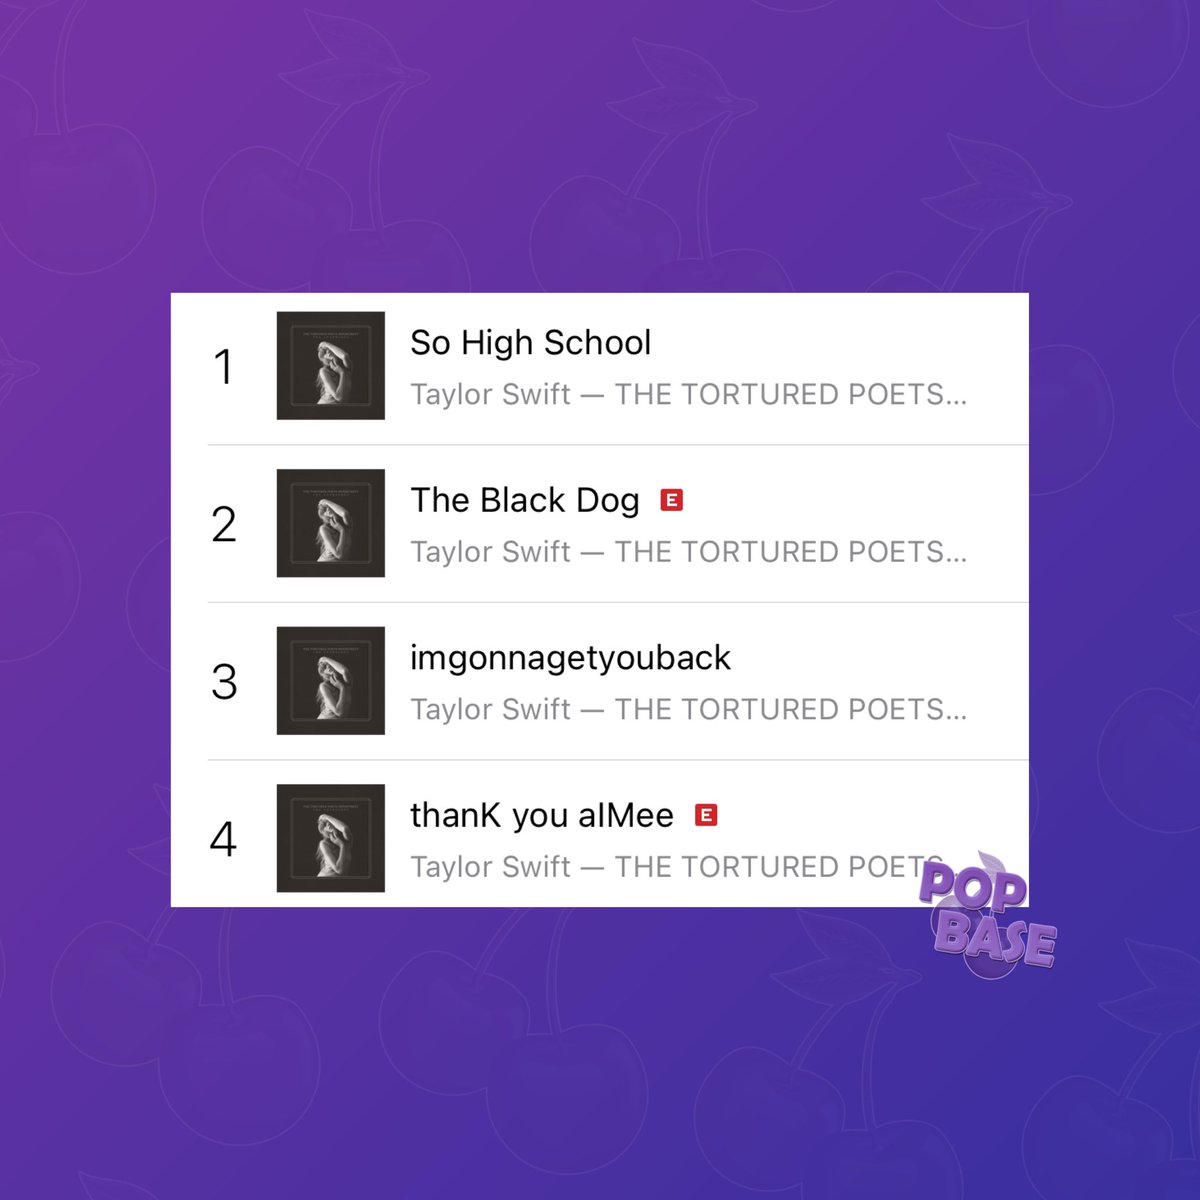 ‘So High School’ by Taylor Swift is now the #1 song on US iTunes, surpassing her own ‘The Black Dog.’